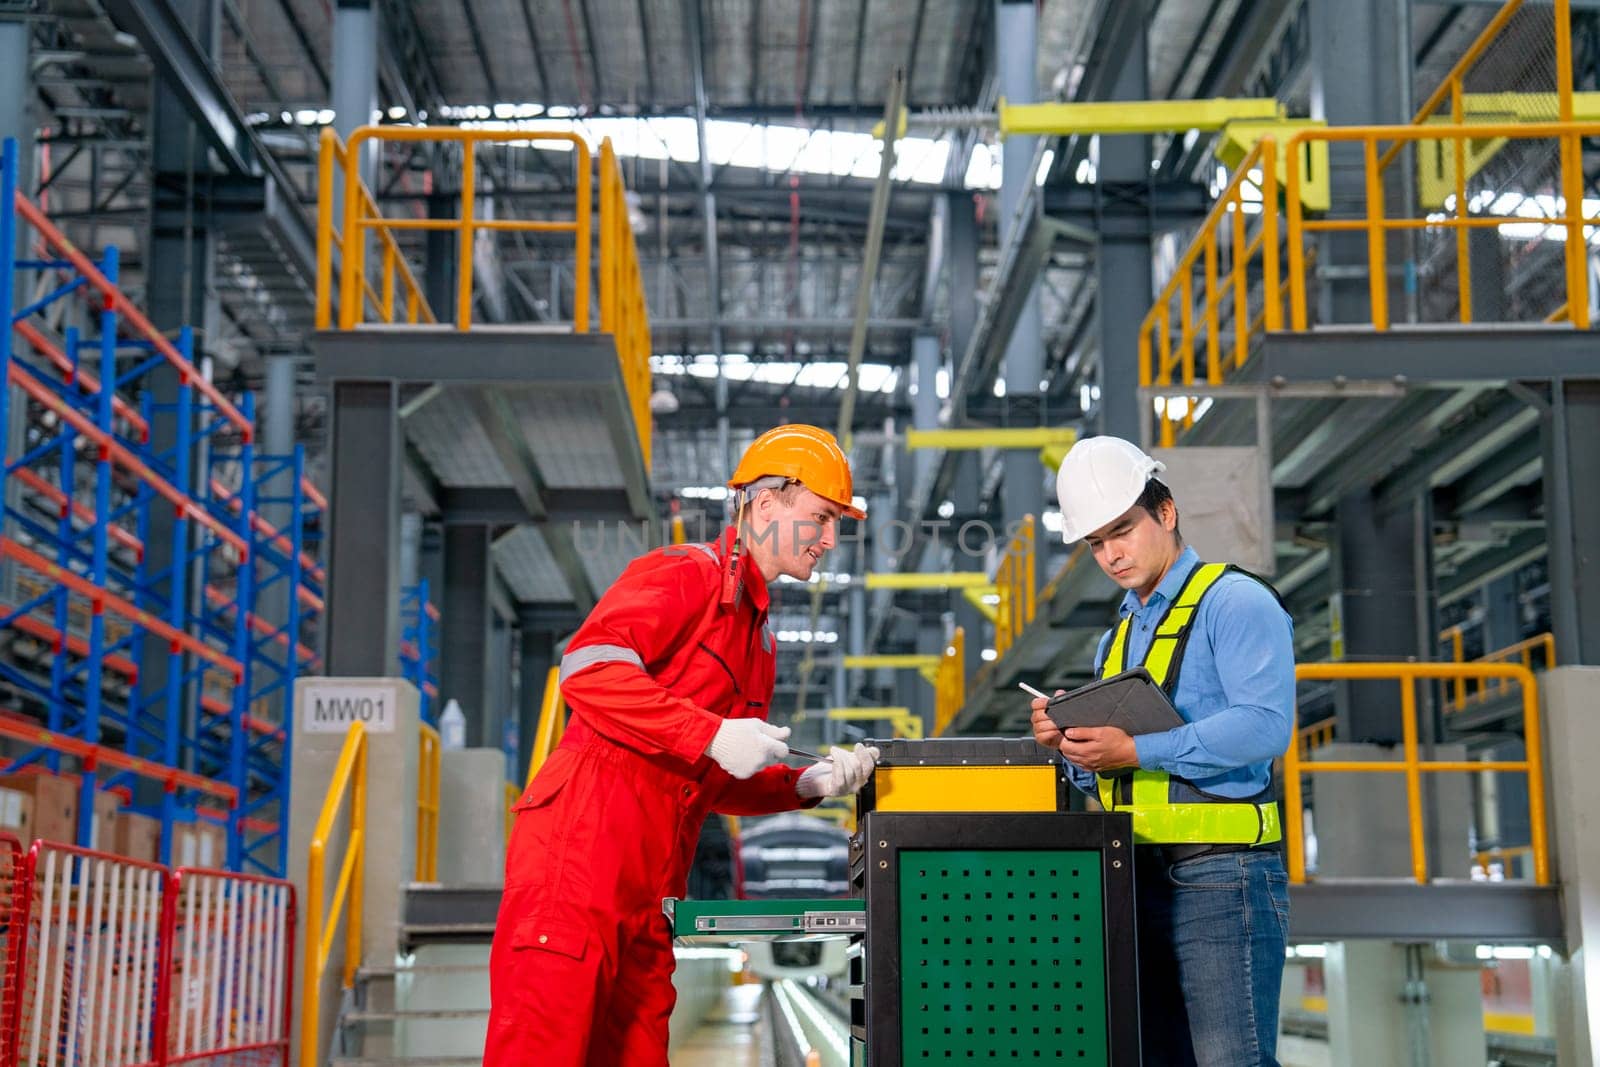 Professional technician and engineer worker discuss about tools and equipment with cabinet in front of railroad tracks of electrical or sky train in factory workplace.